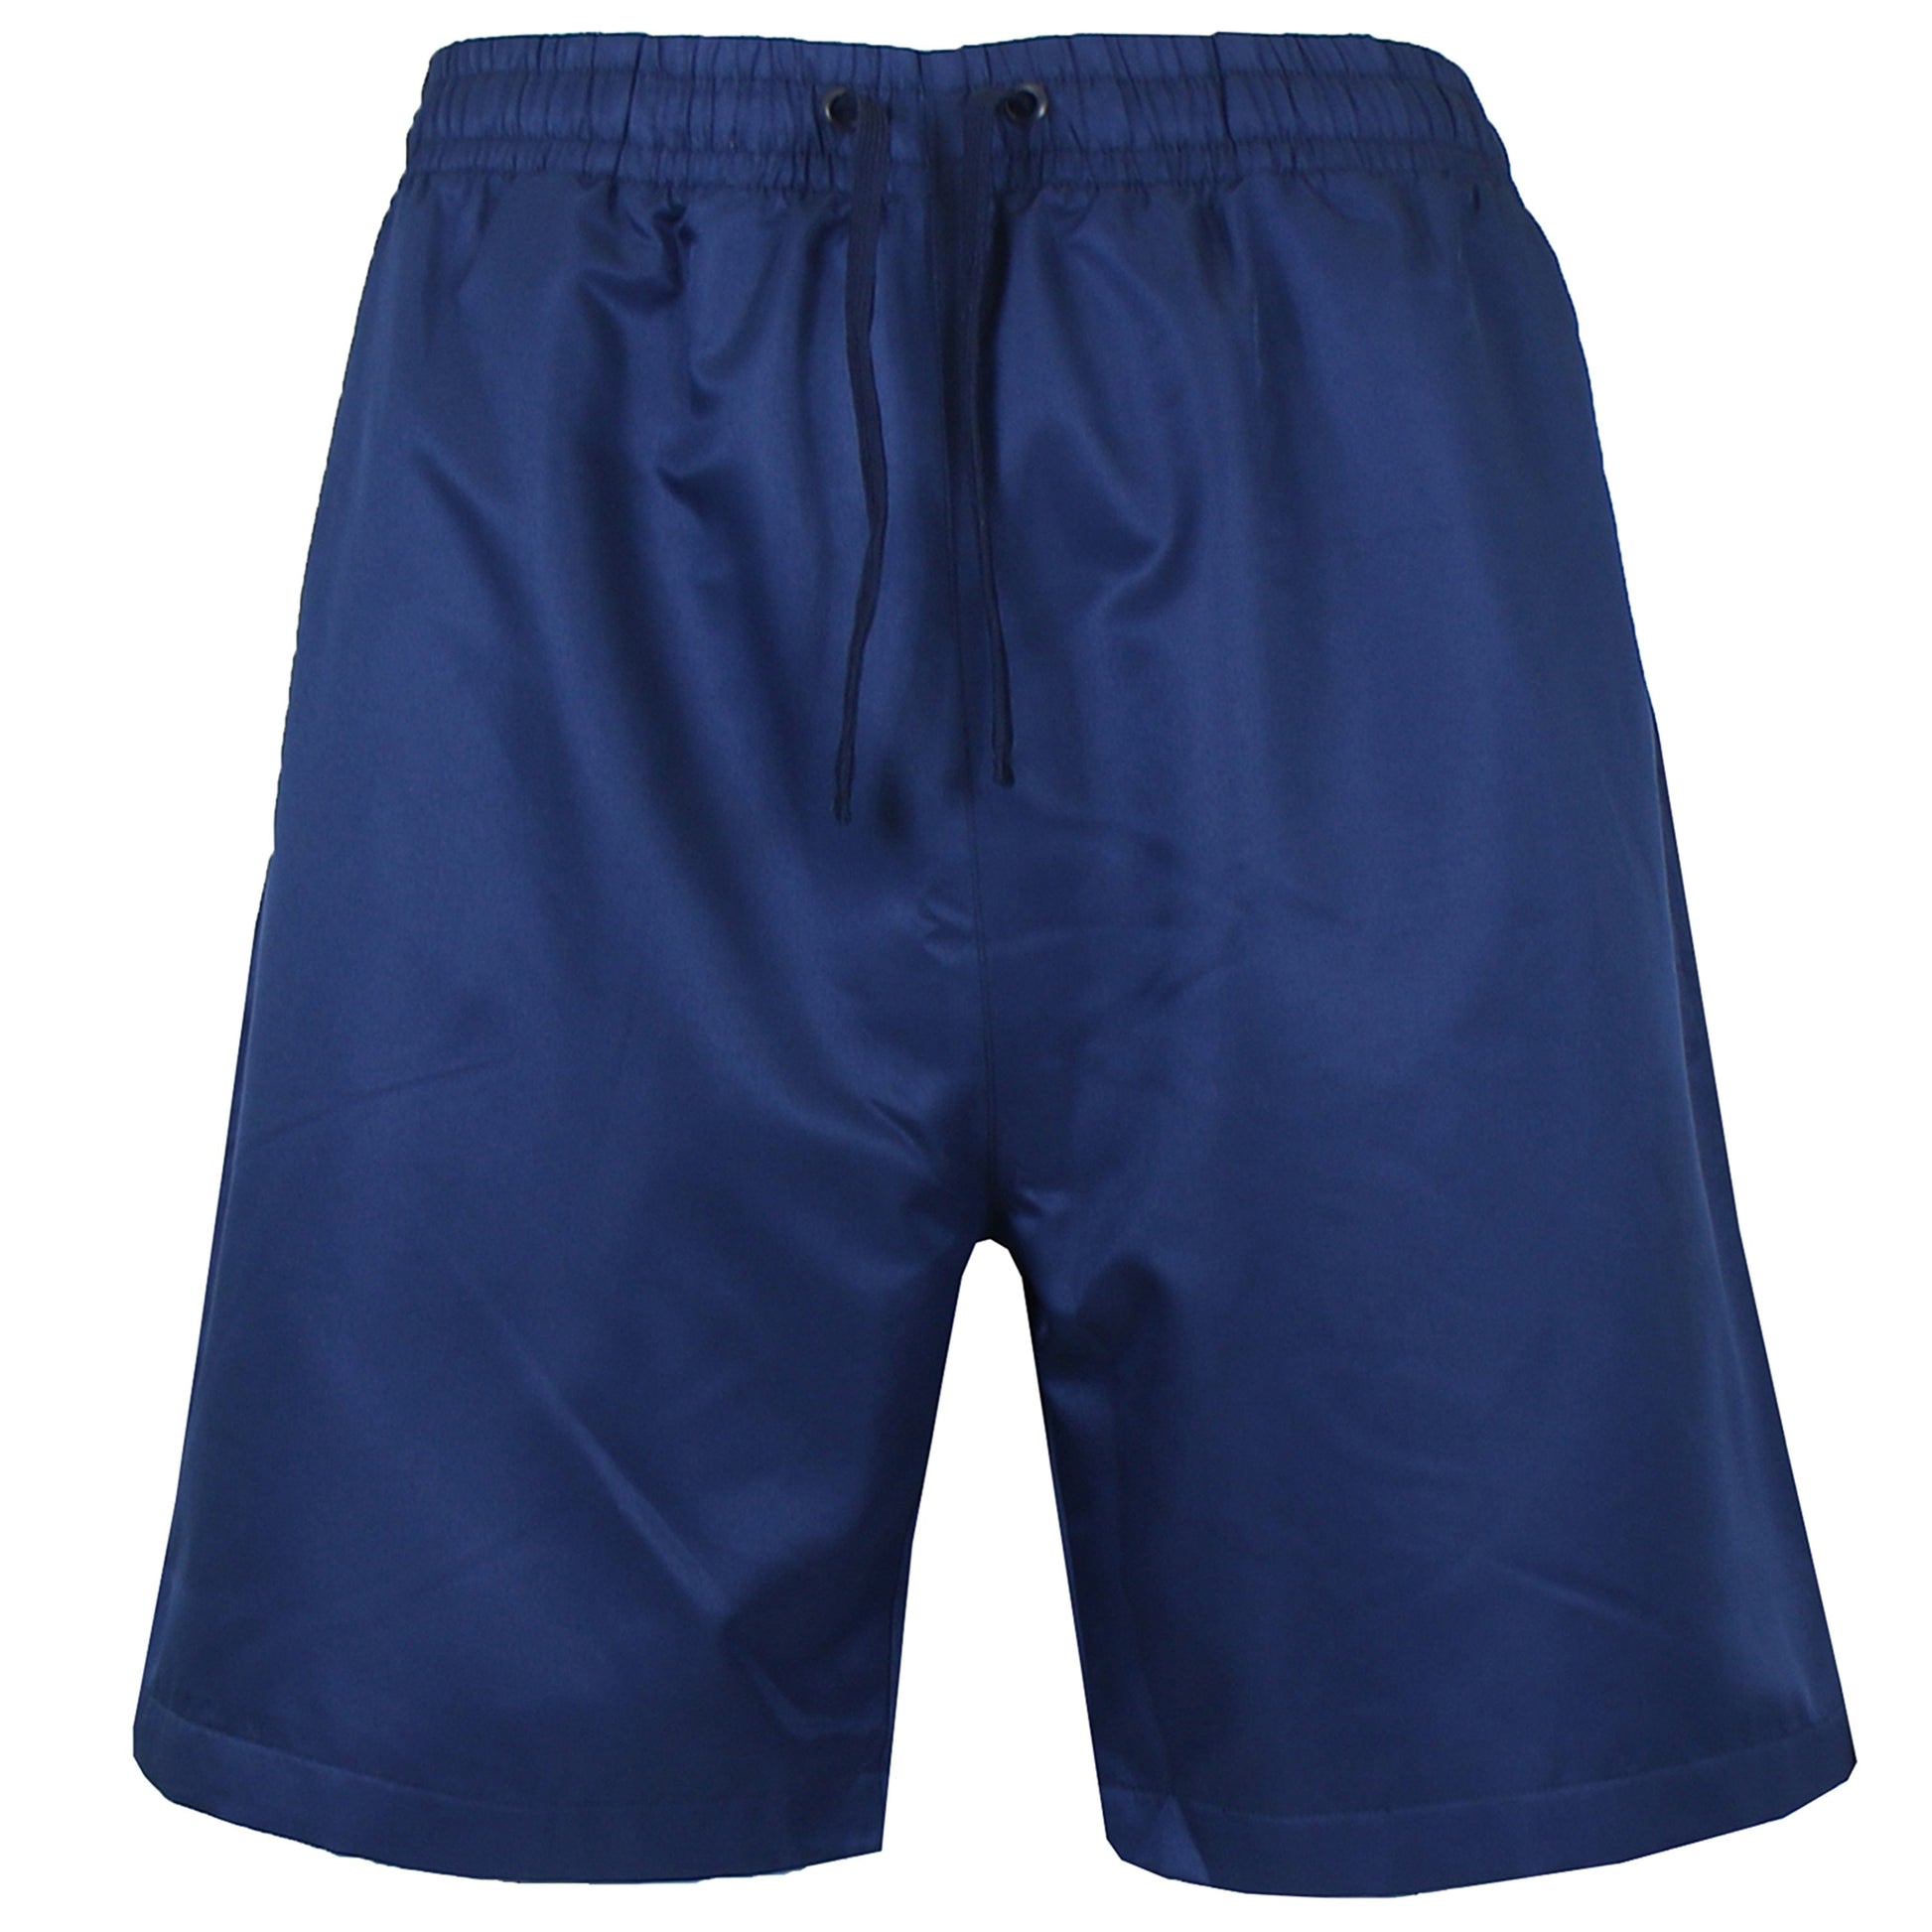 Men's Active Training Performance Shorts - GalaxybyHarvic